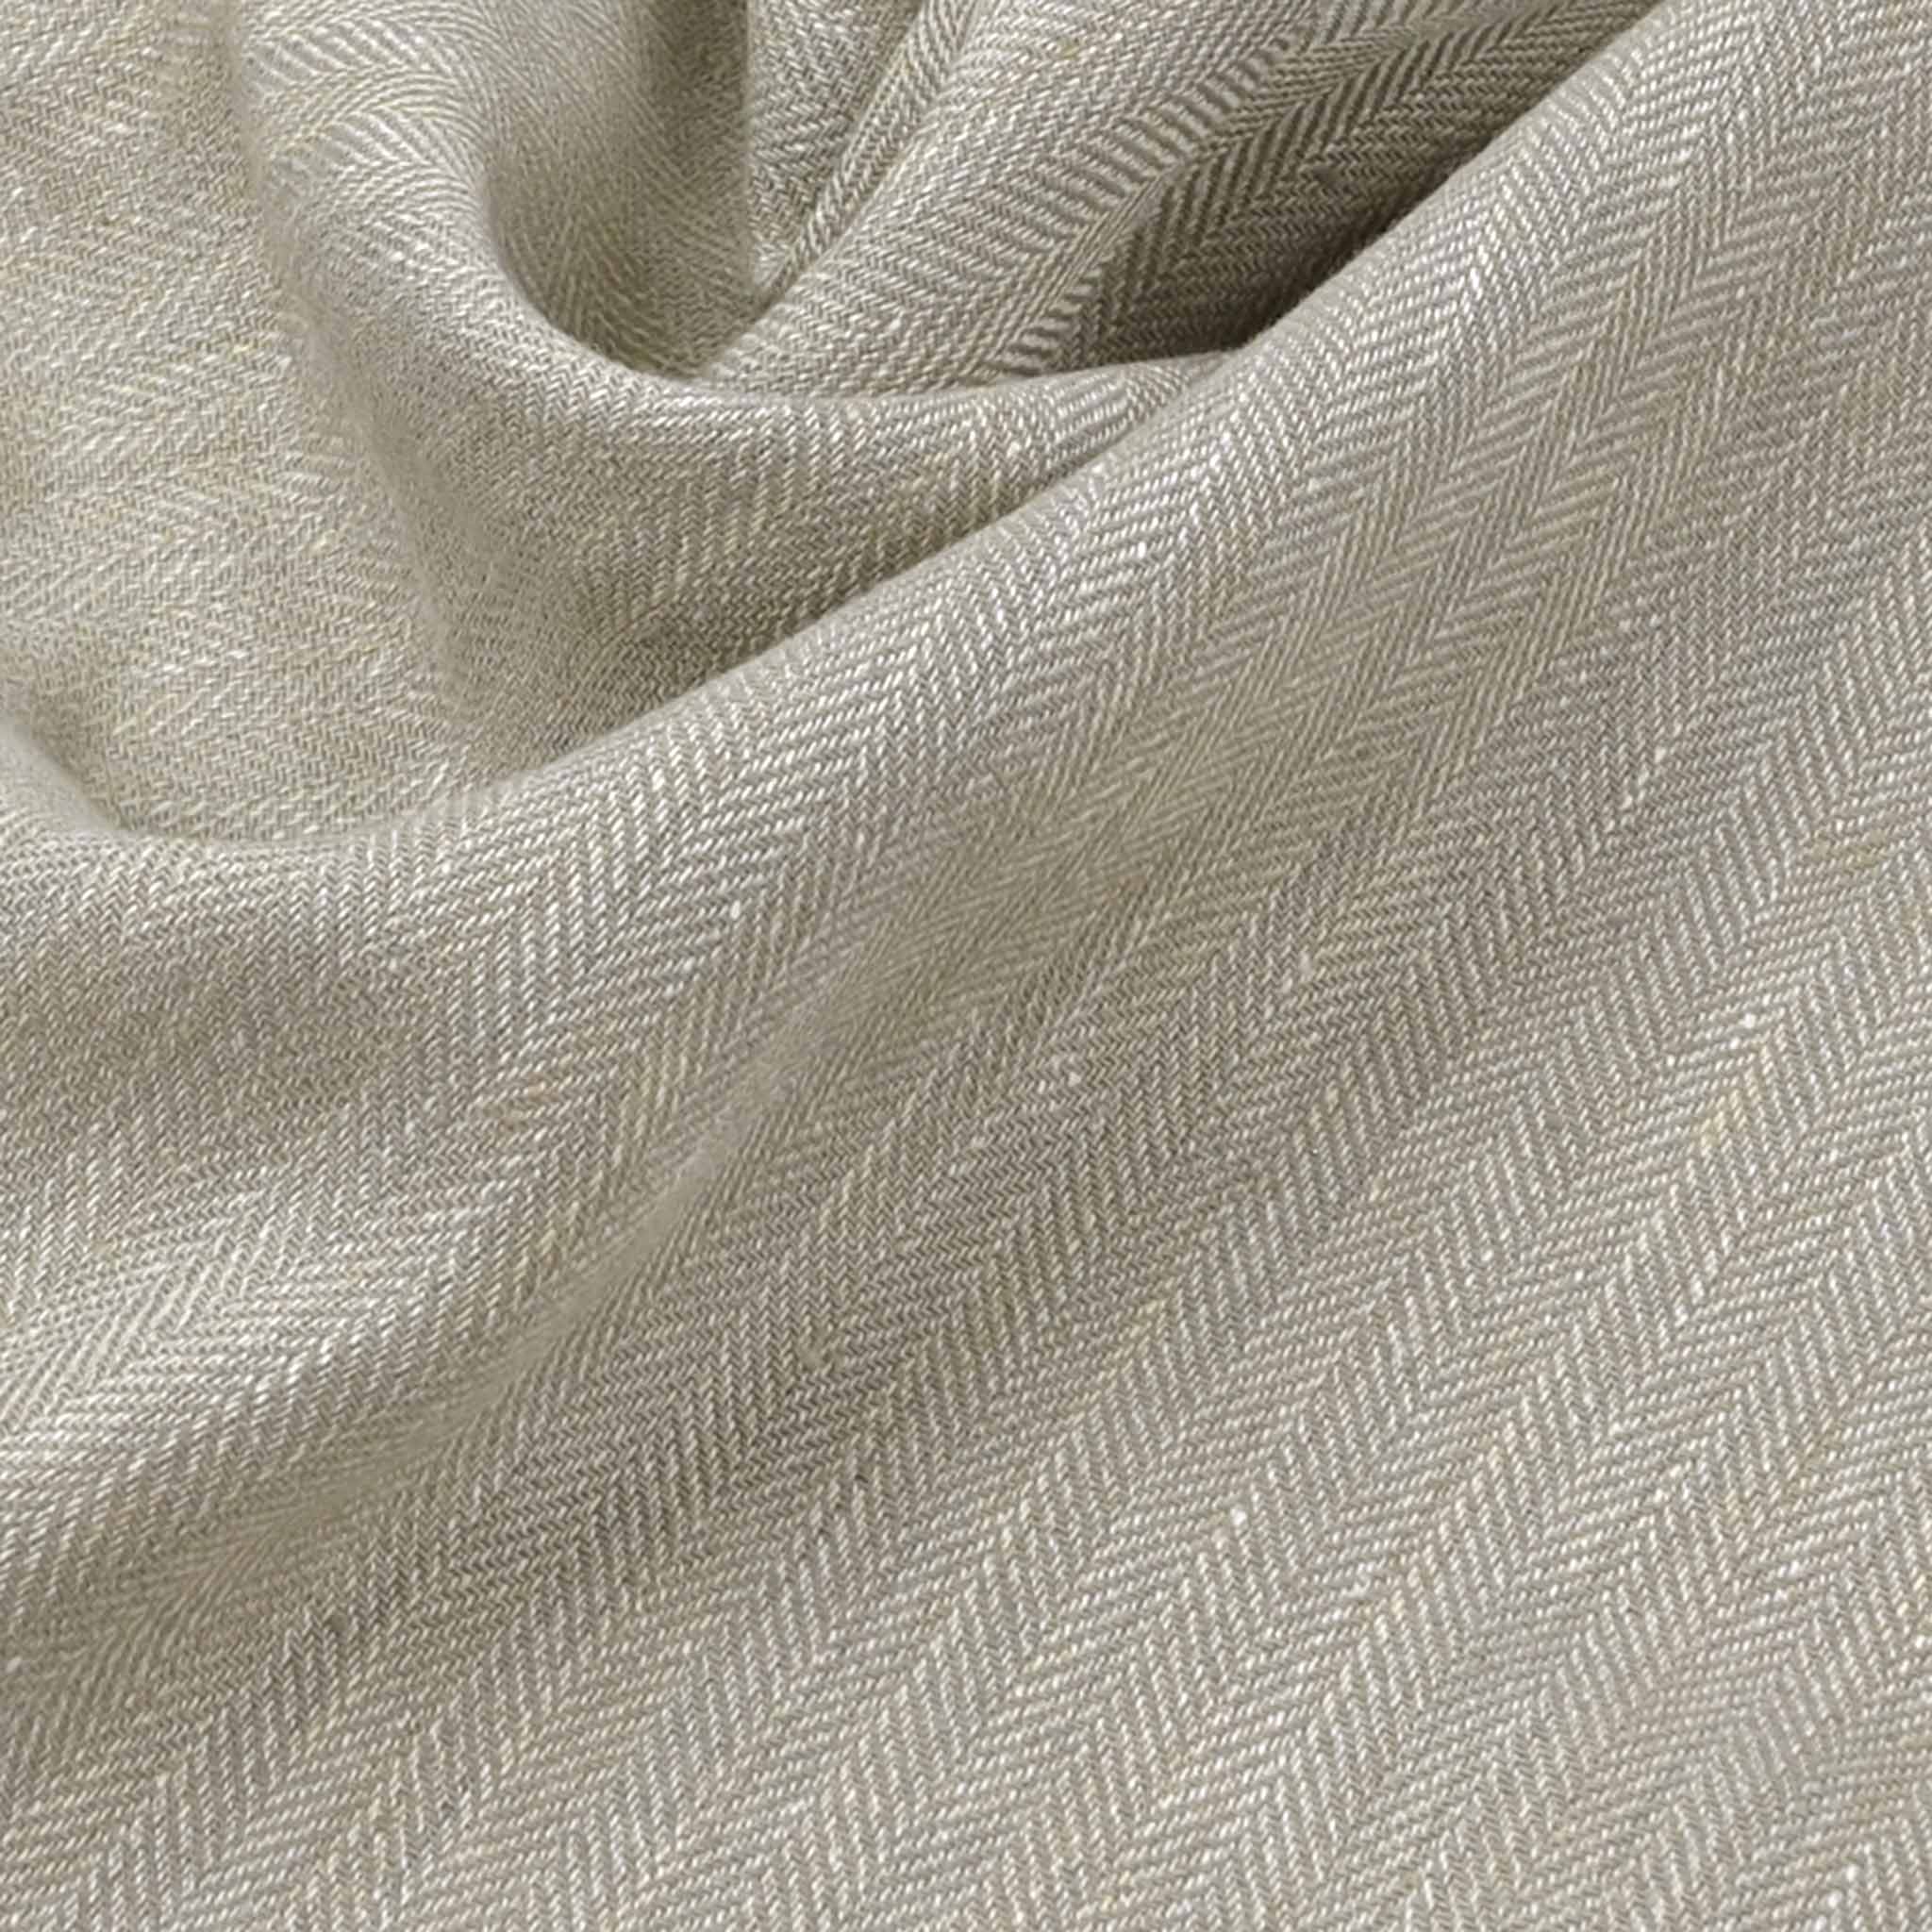 Wrinkled taupe herringbone linen fabric made from natural fibers, textured with a natural drape and luxurious hand, suitable for summer clothing.